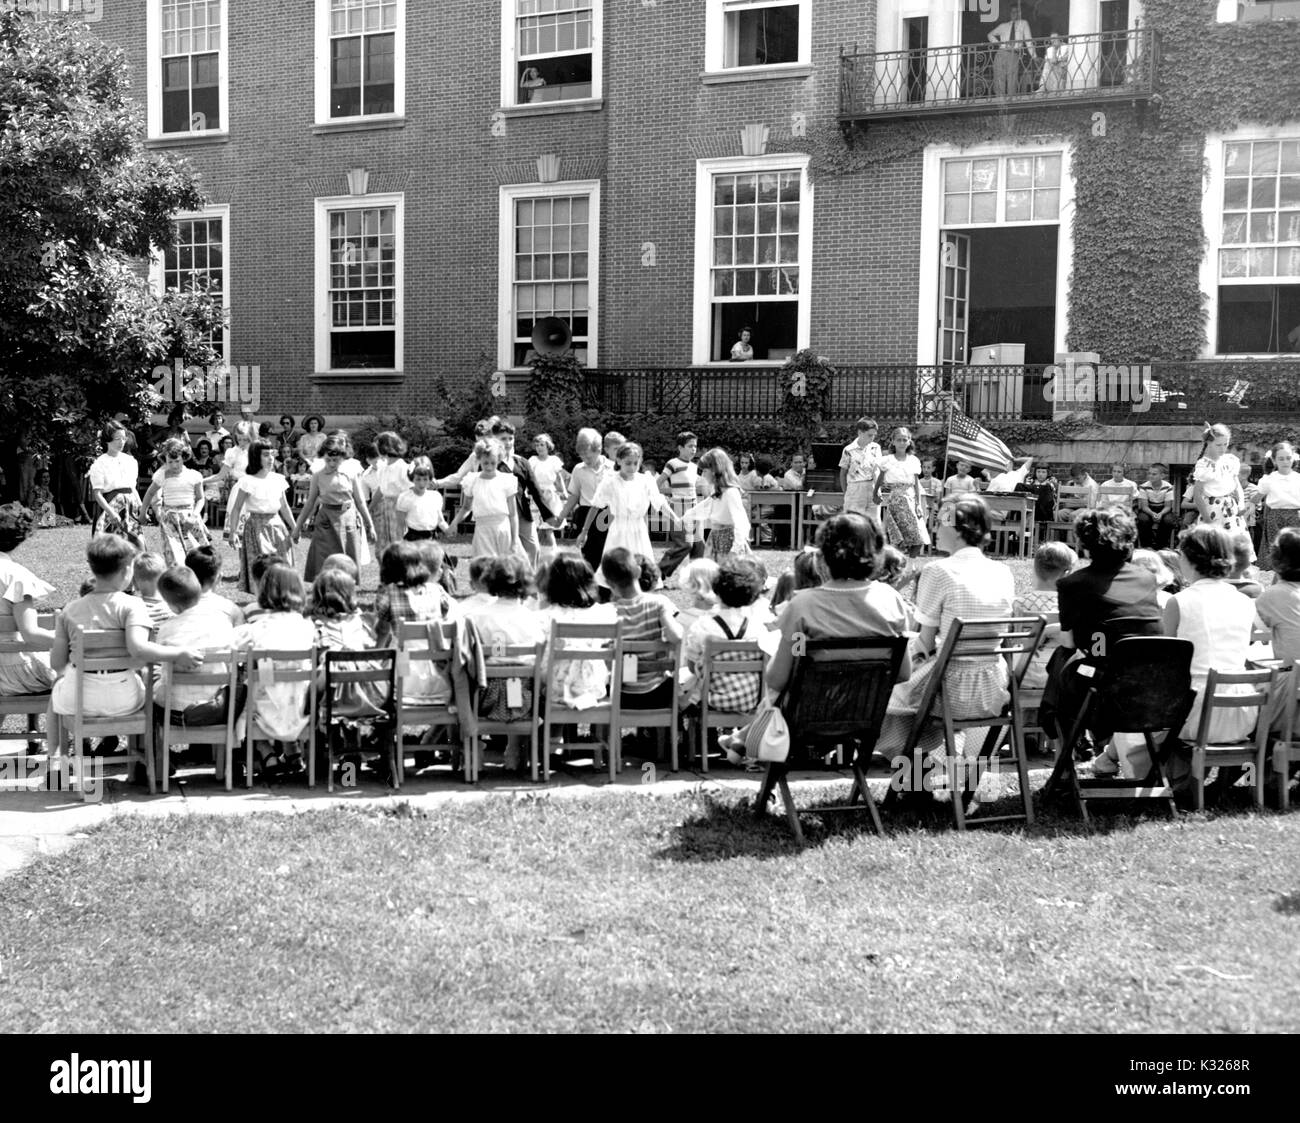 At the end of the school year for a demonstration school at Johns Hopkins University, young boys and girls put on a show in the grass on a sunny day, standing in a group holding hands while one girl waves an American flag, in front of an audience made up of parents, teachers, and classmates sitting in chairs outside of an ivy-covered campus building, Baltimore, Maryland, July, 1950. Stock Photo